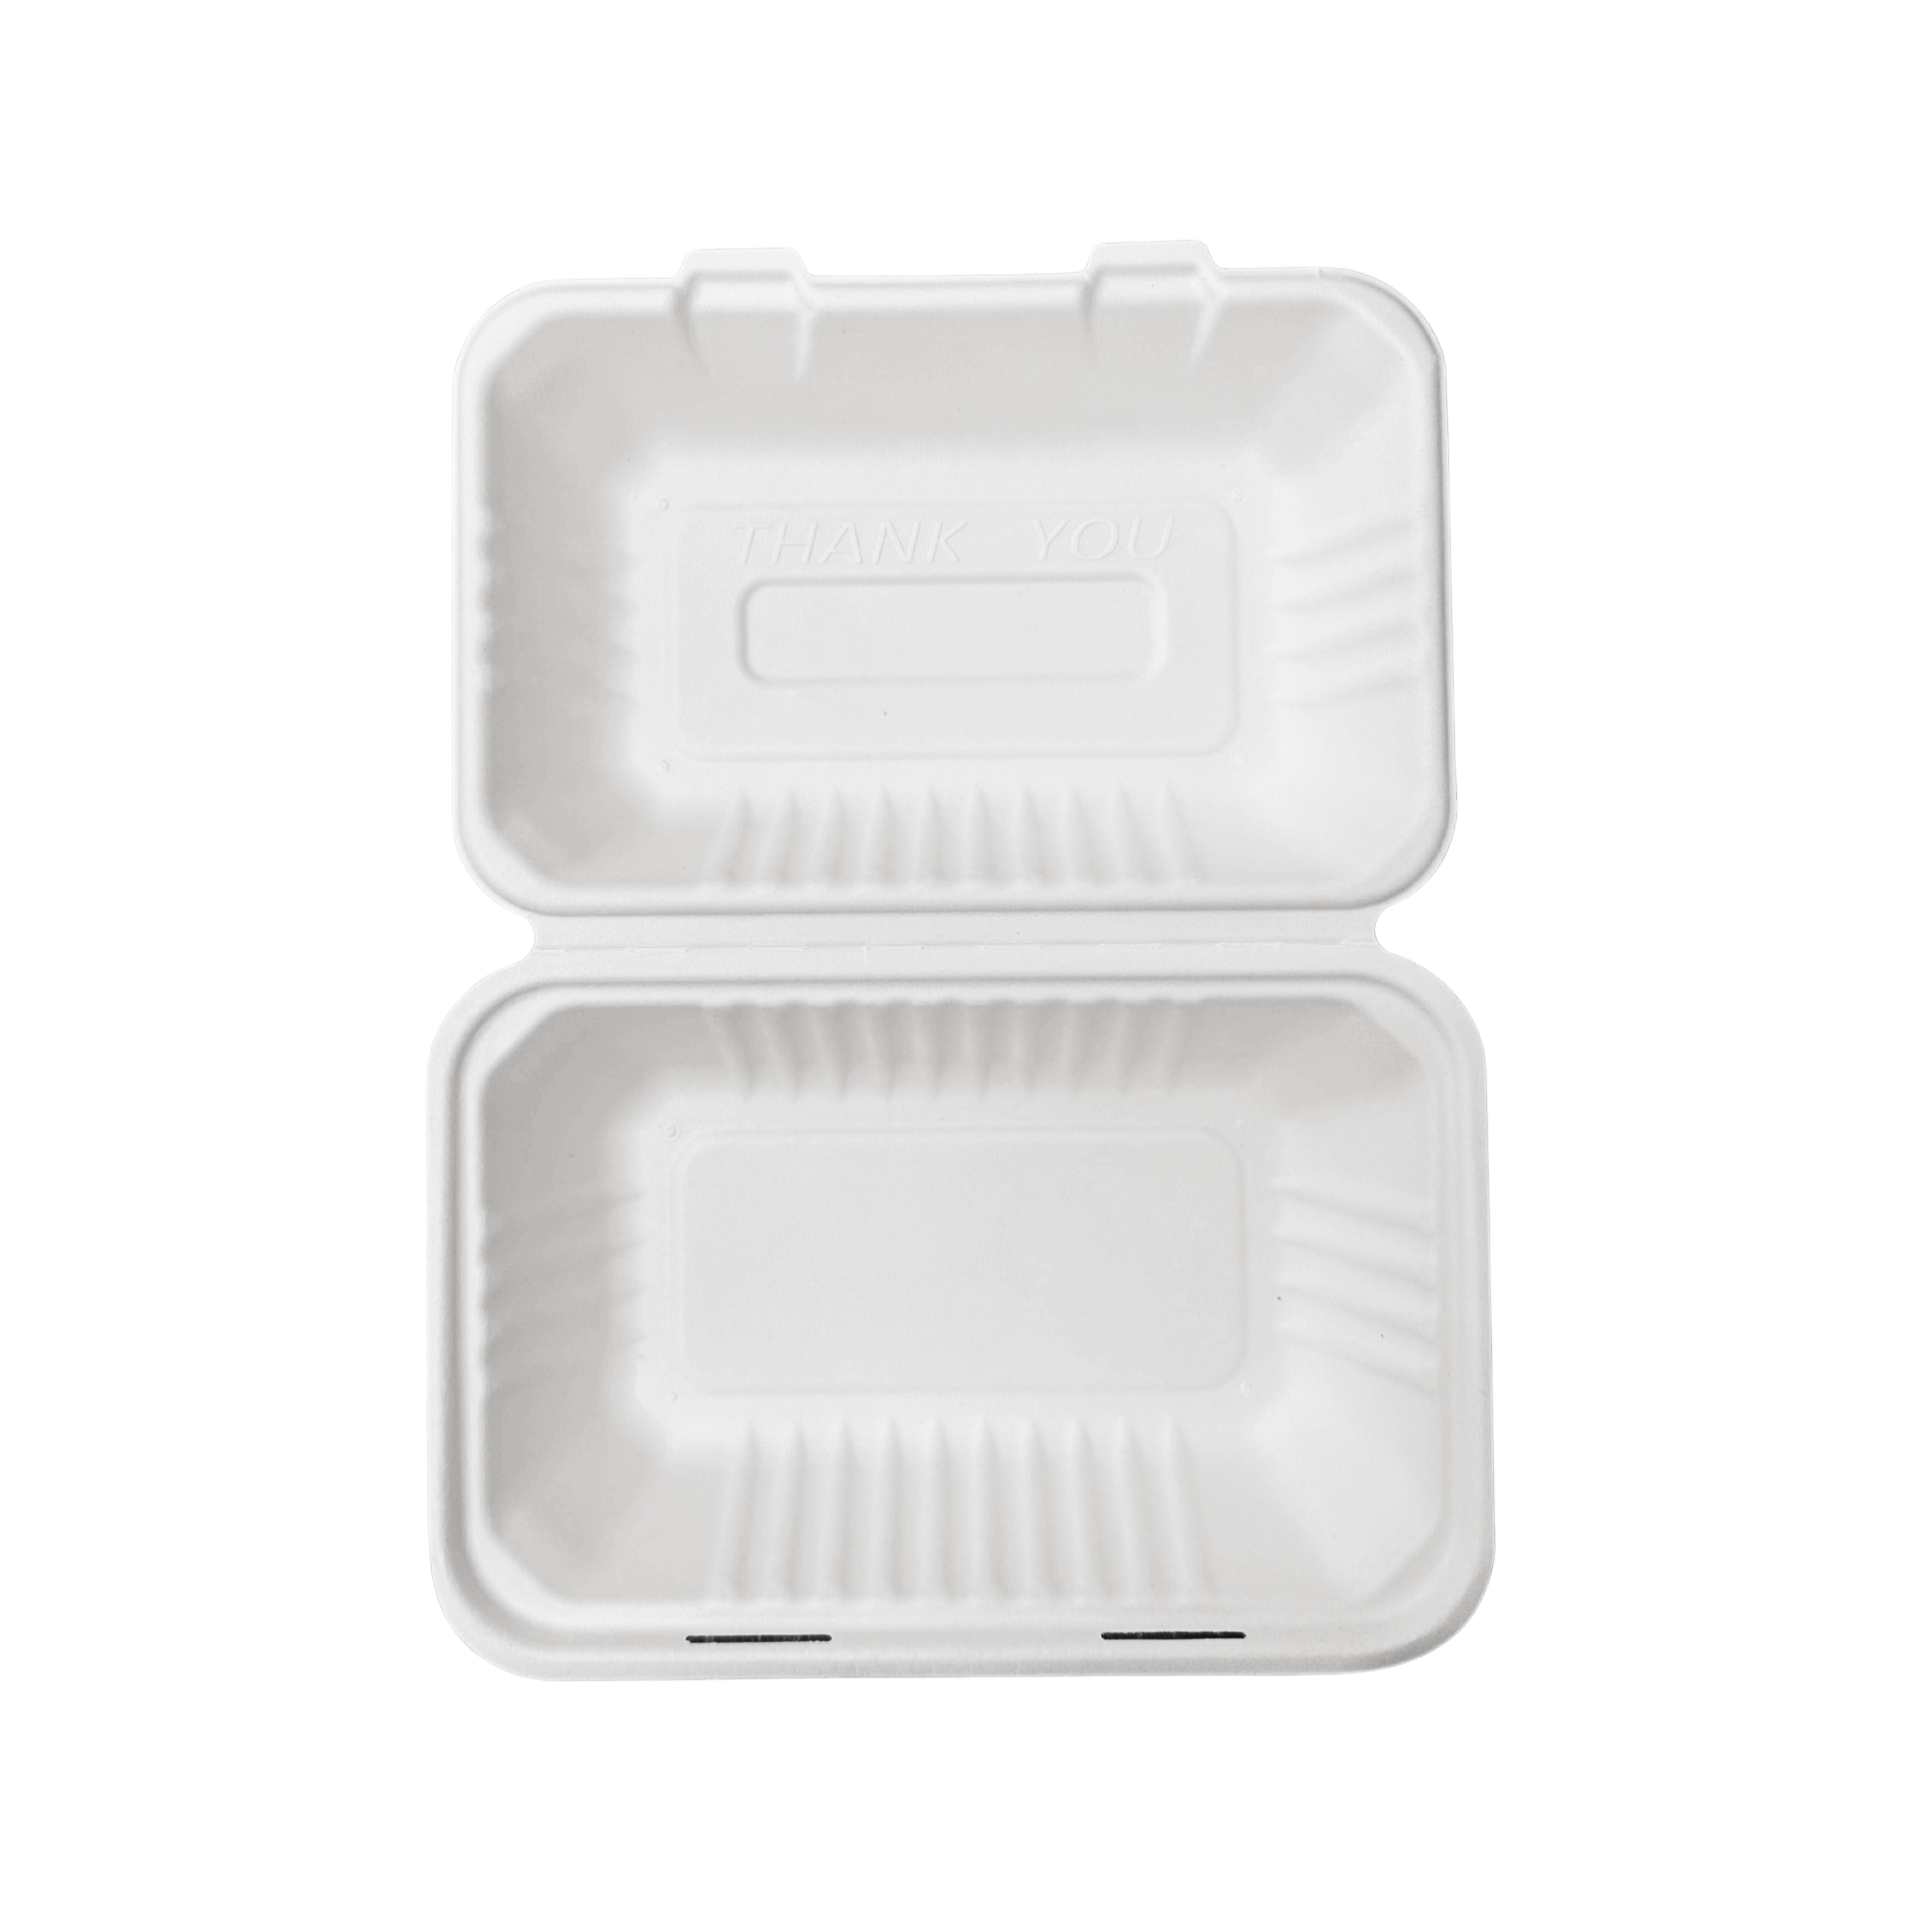 250 Pcs, 9x6x3'', 1-Compartment, Sugarcane Clamshell Food Container